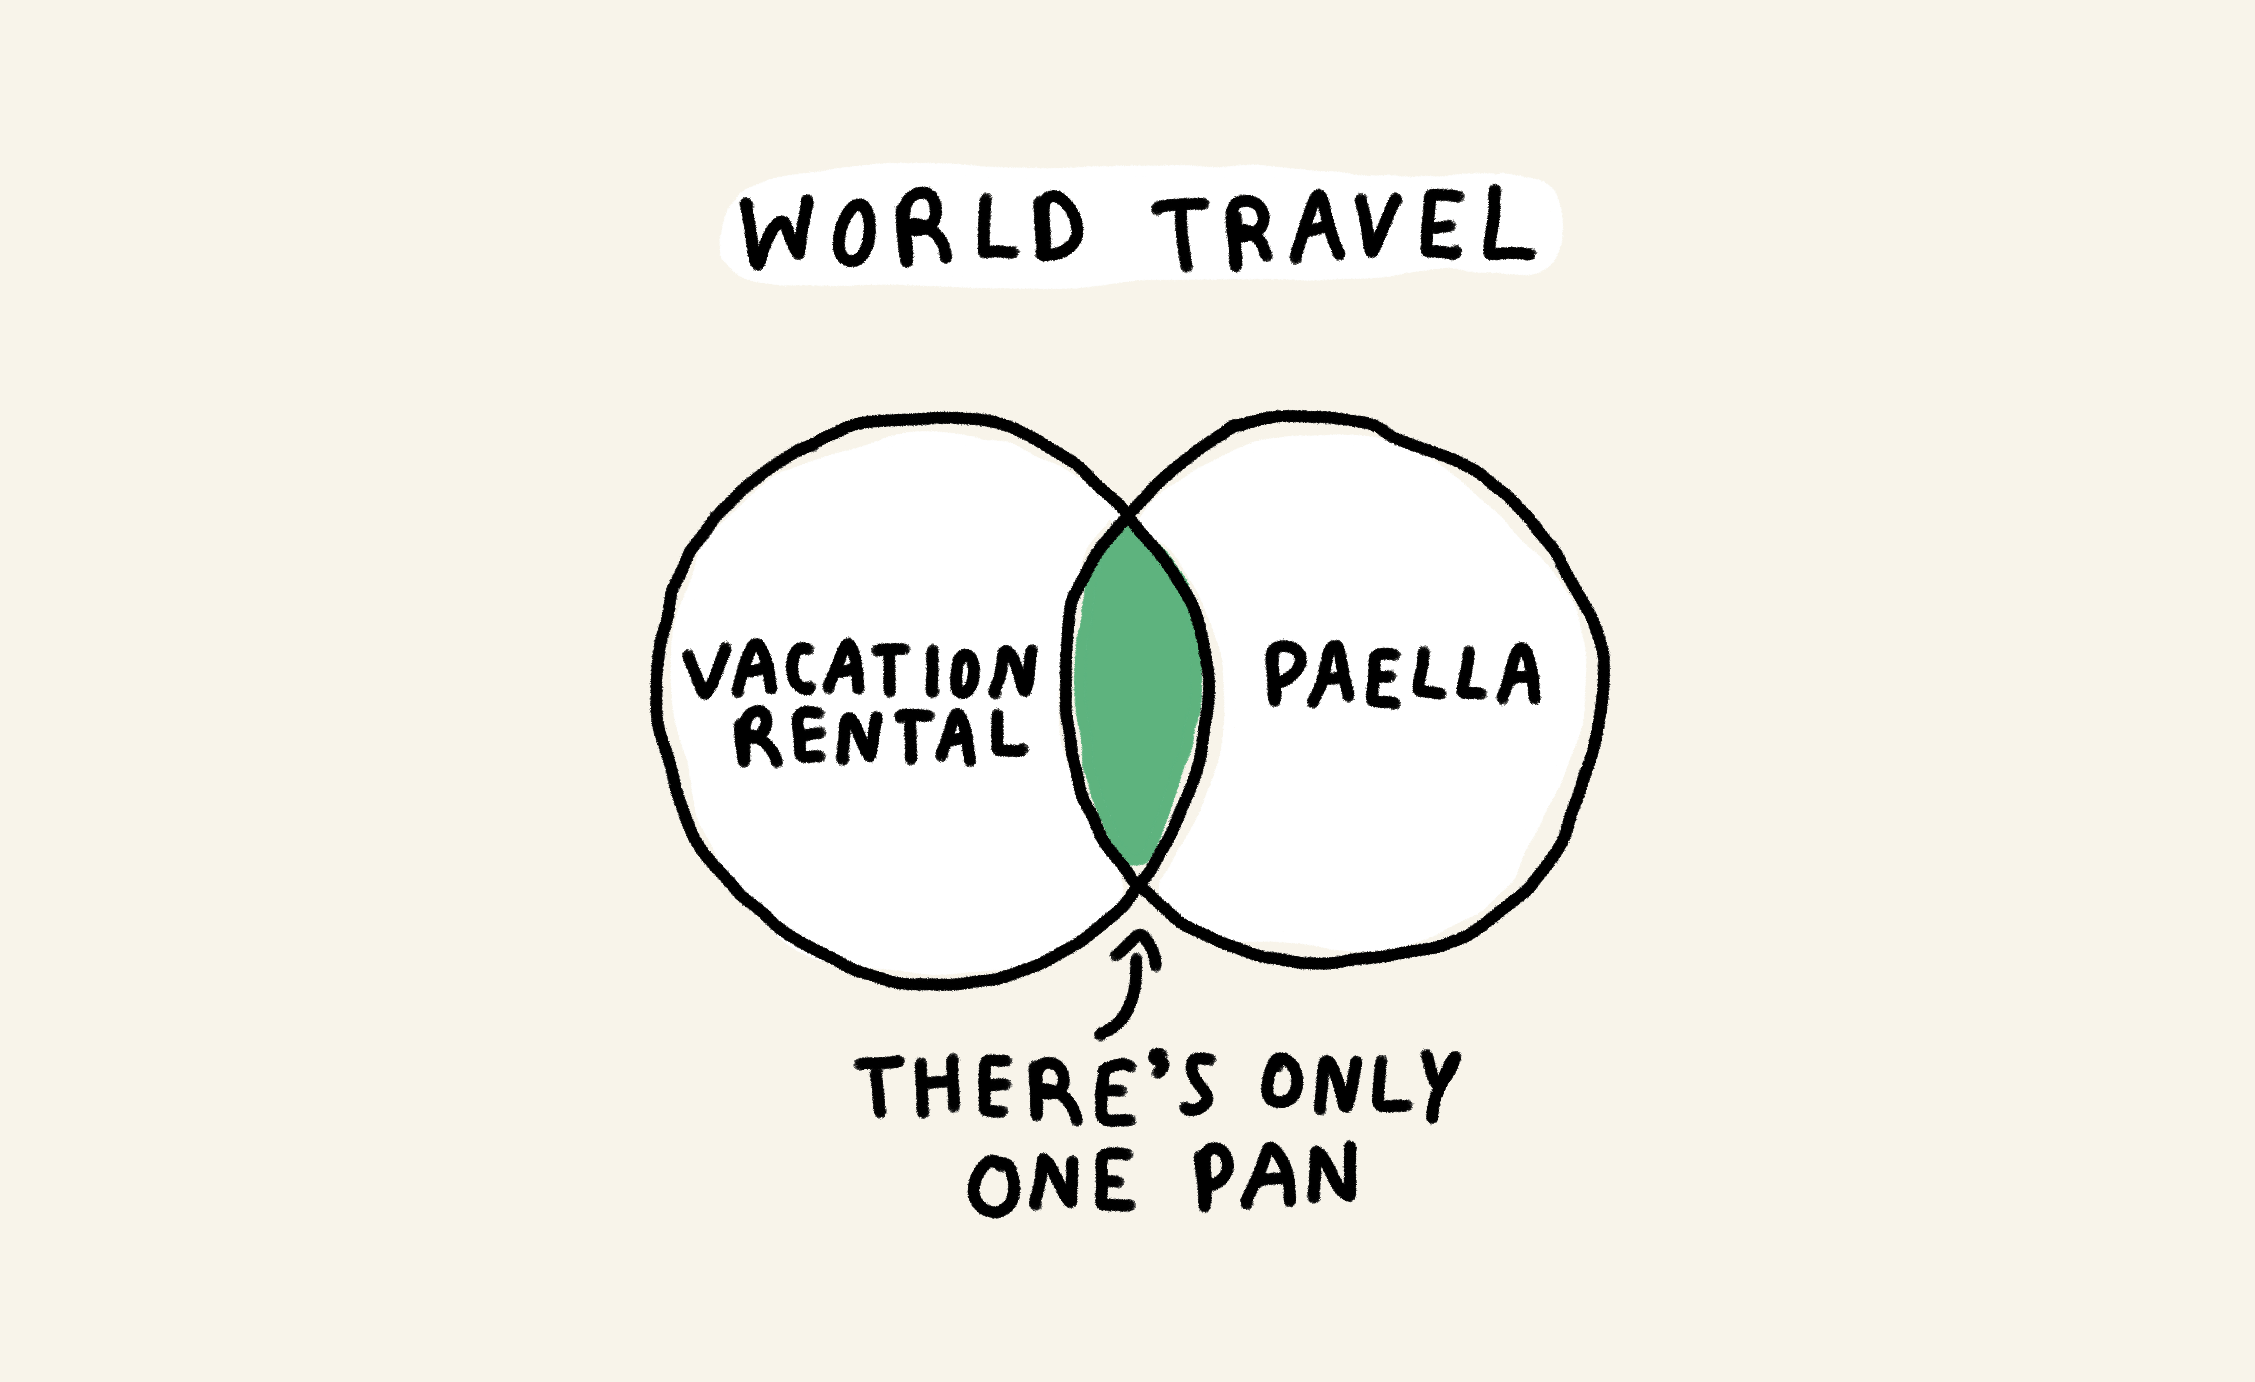 World Travel

Vacation rental + paella = there's only one pan